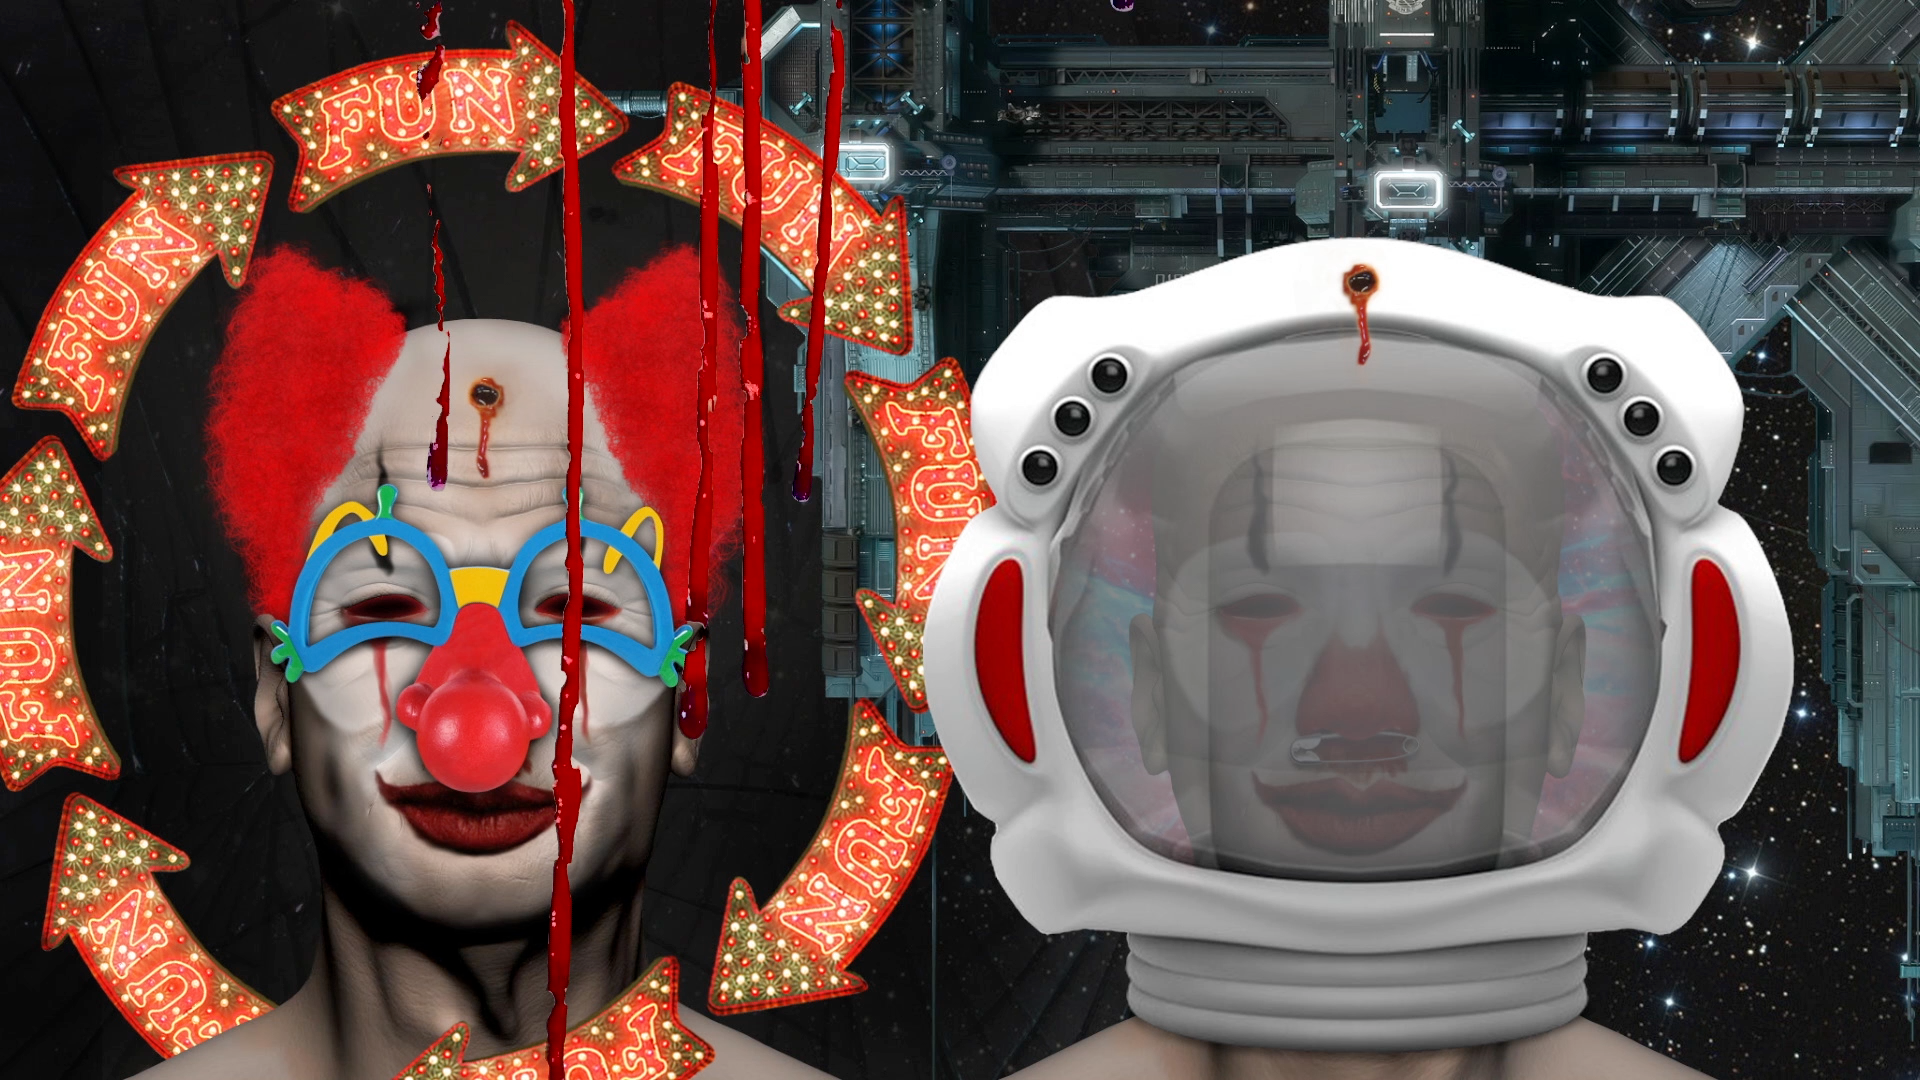 Clown Torture / Hell Station